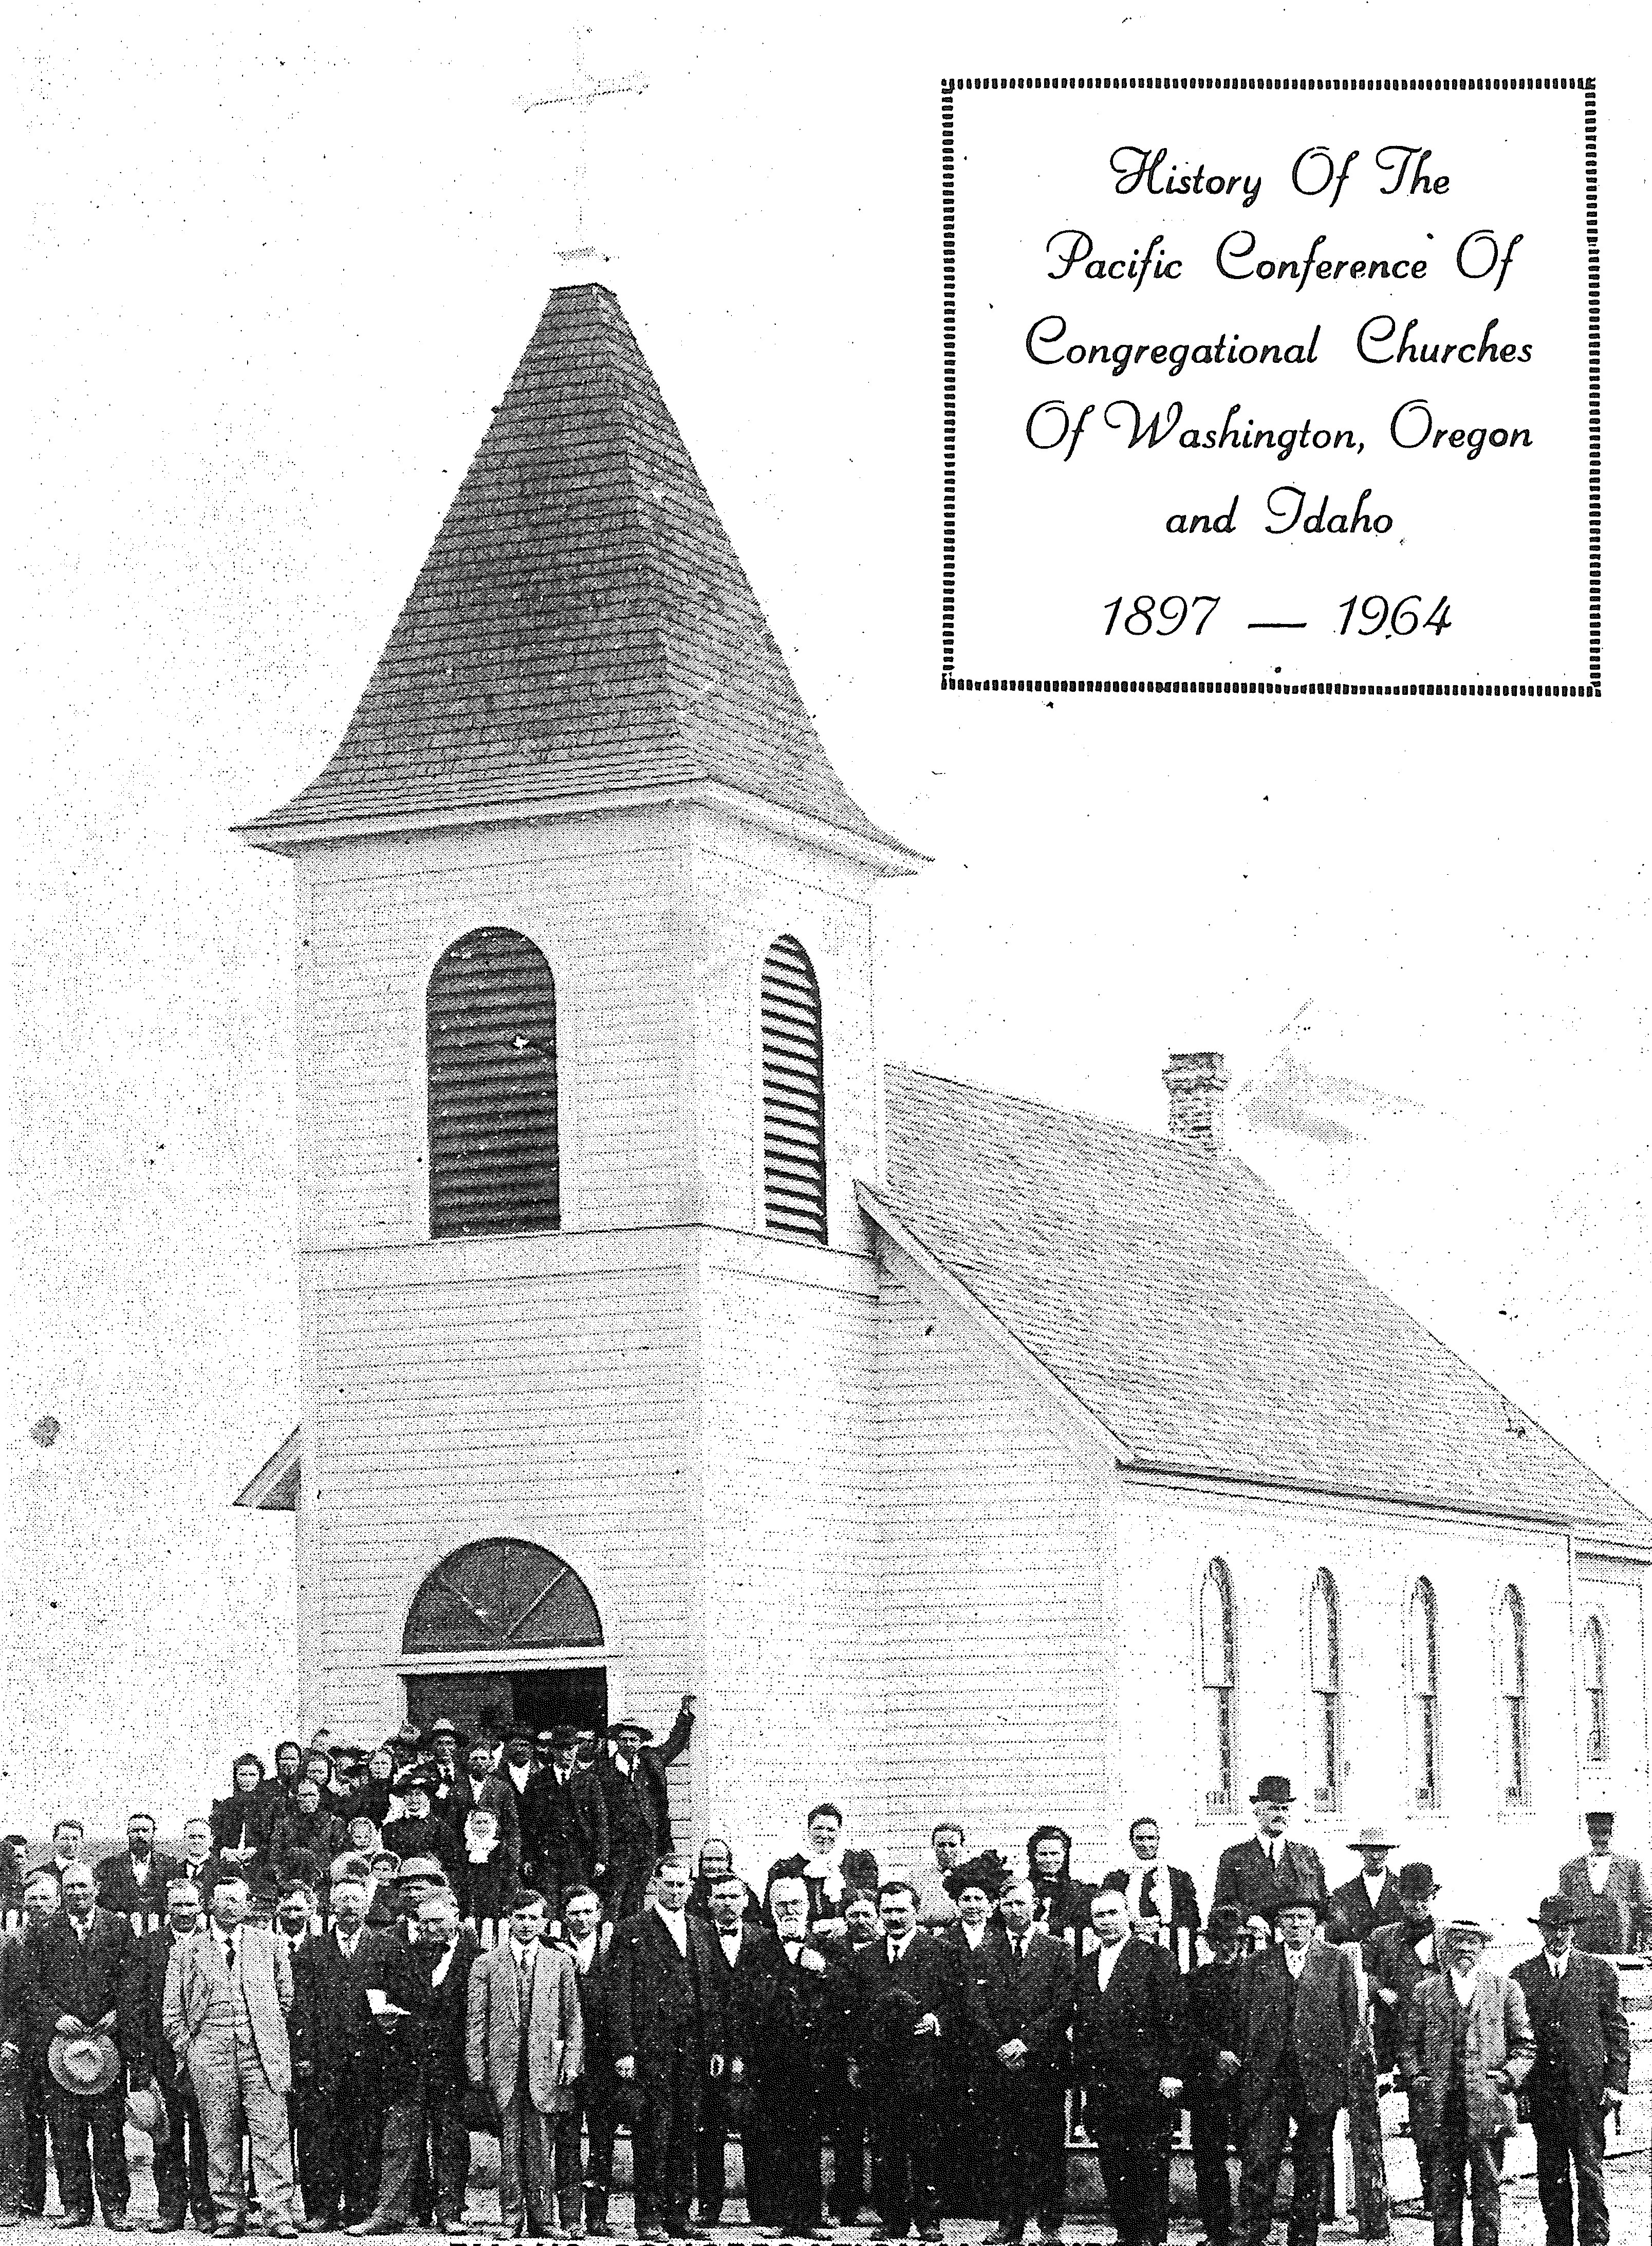 Emaus Congregational Church South of Odessa, Washington Photo from cover of 1964 history book.